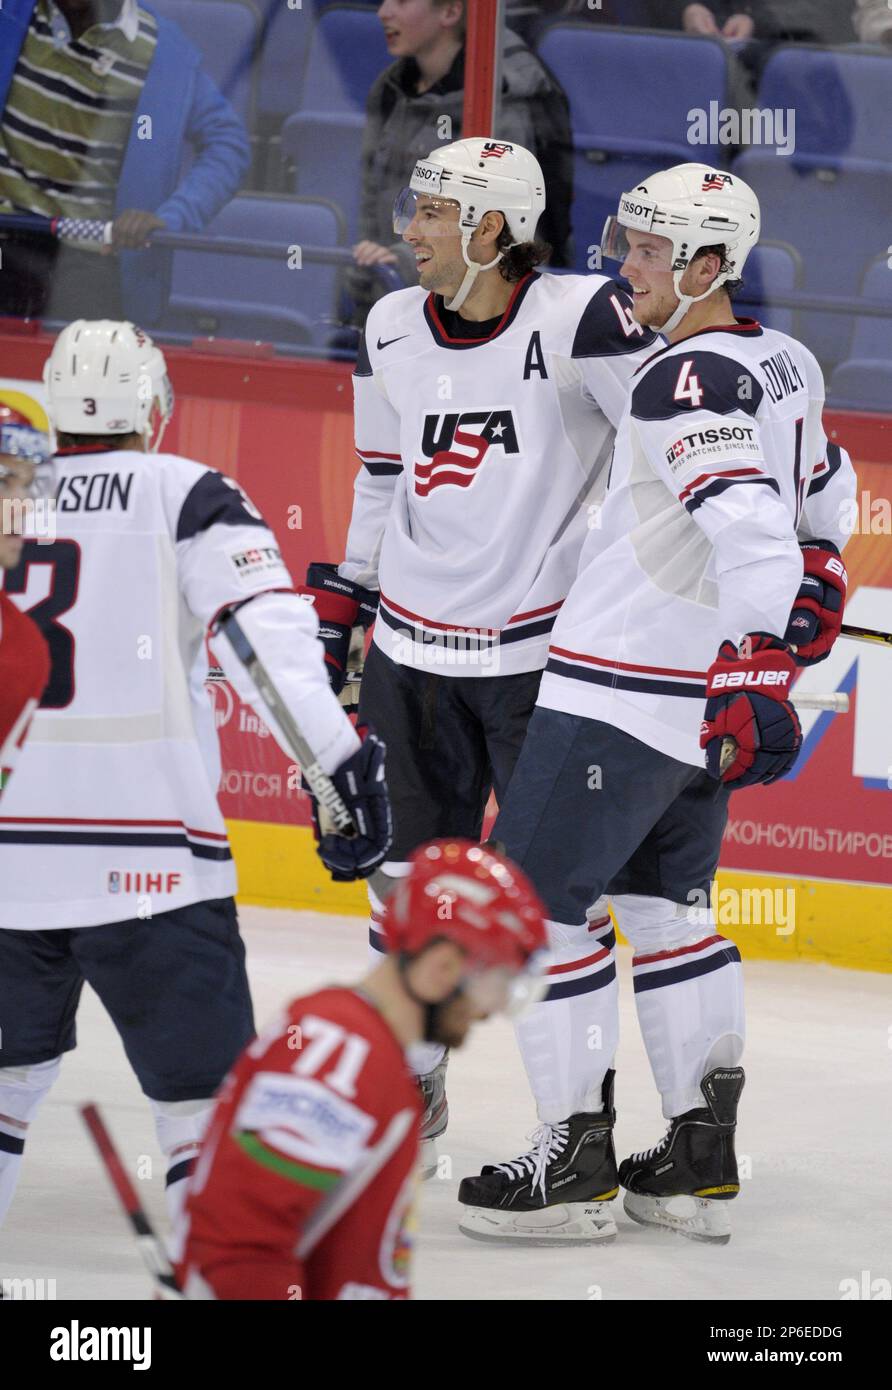 Alexei Kalyuzhny, front, of Belarus skates away as Jack Johnson, left, Nate  Thompson and Cam Fowler of the United States celebrate a goal during the  Group H game USA vs Belarus in